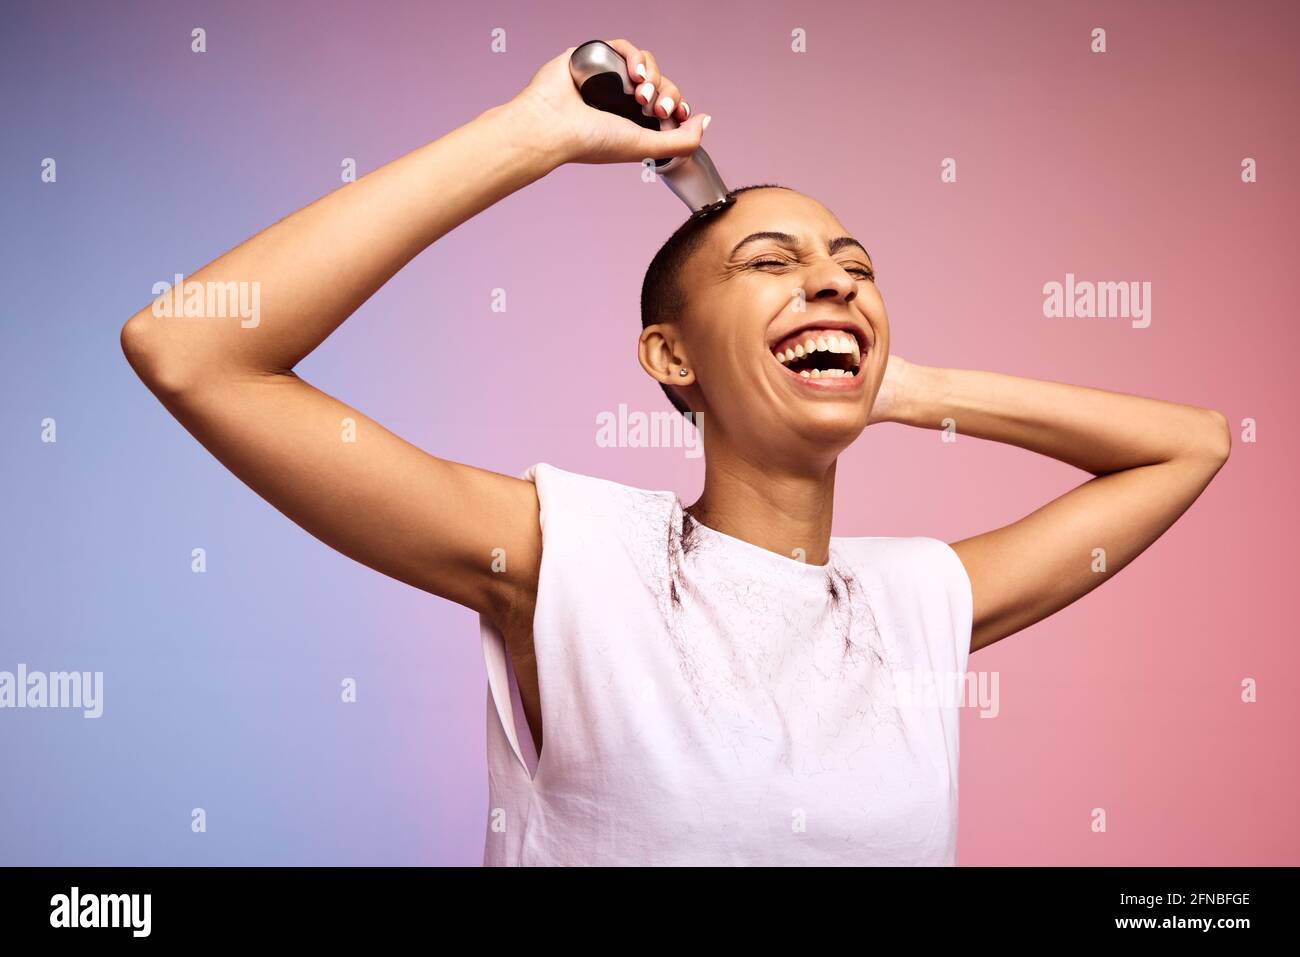 Smiling woman shaving her head. Bold and liberated female cutting her hair with an electric trimmer against multicolored background. Stock Photo